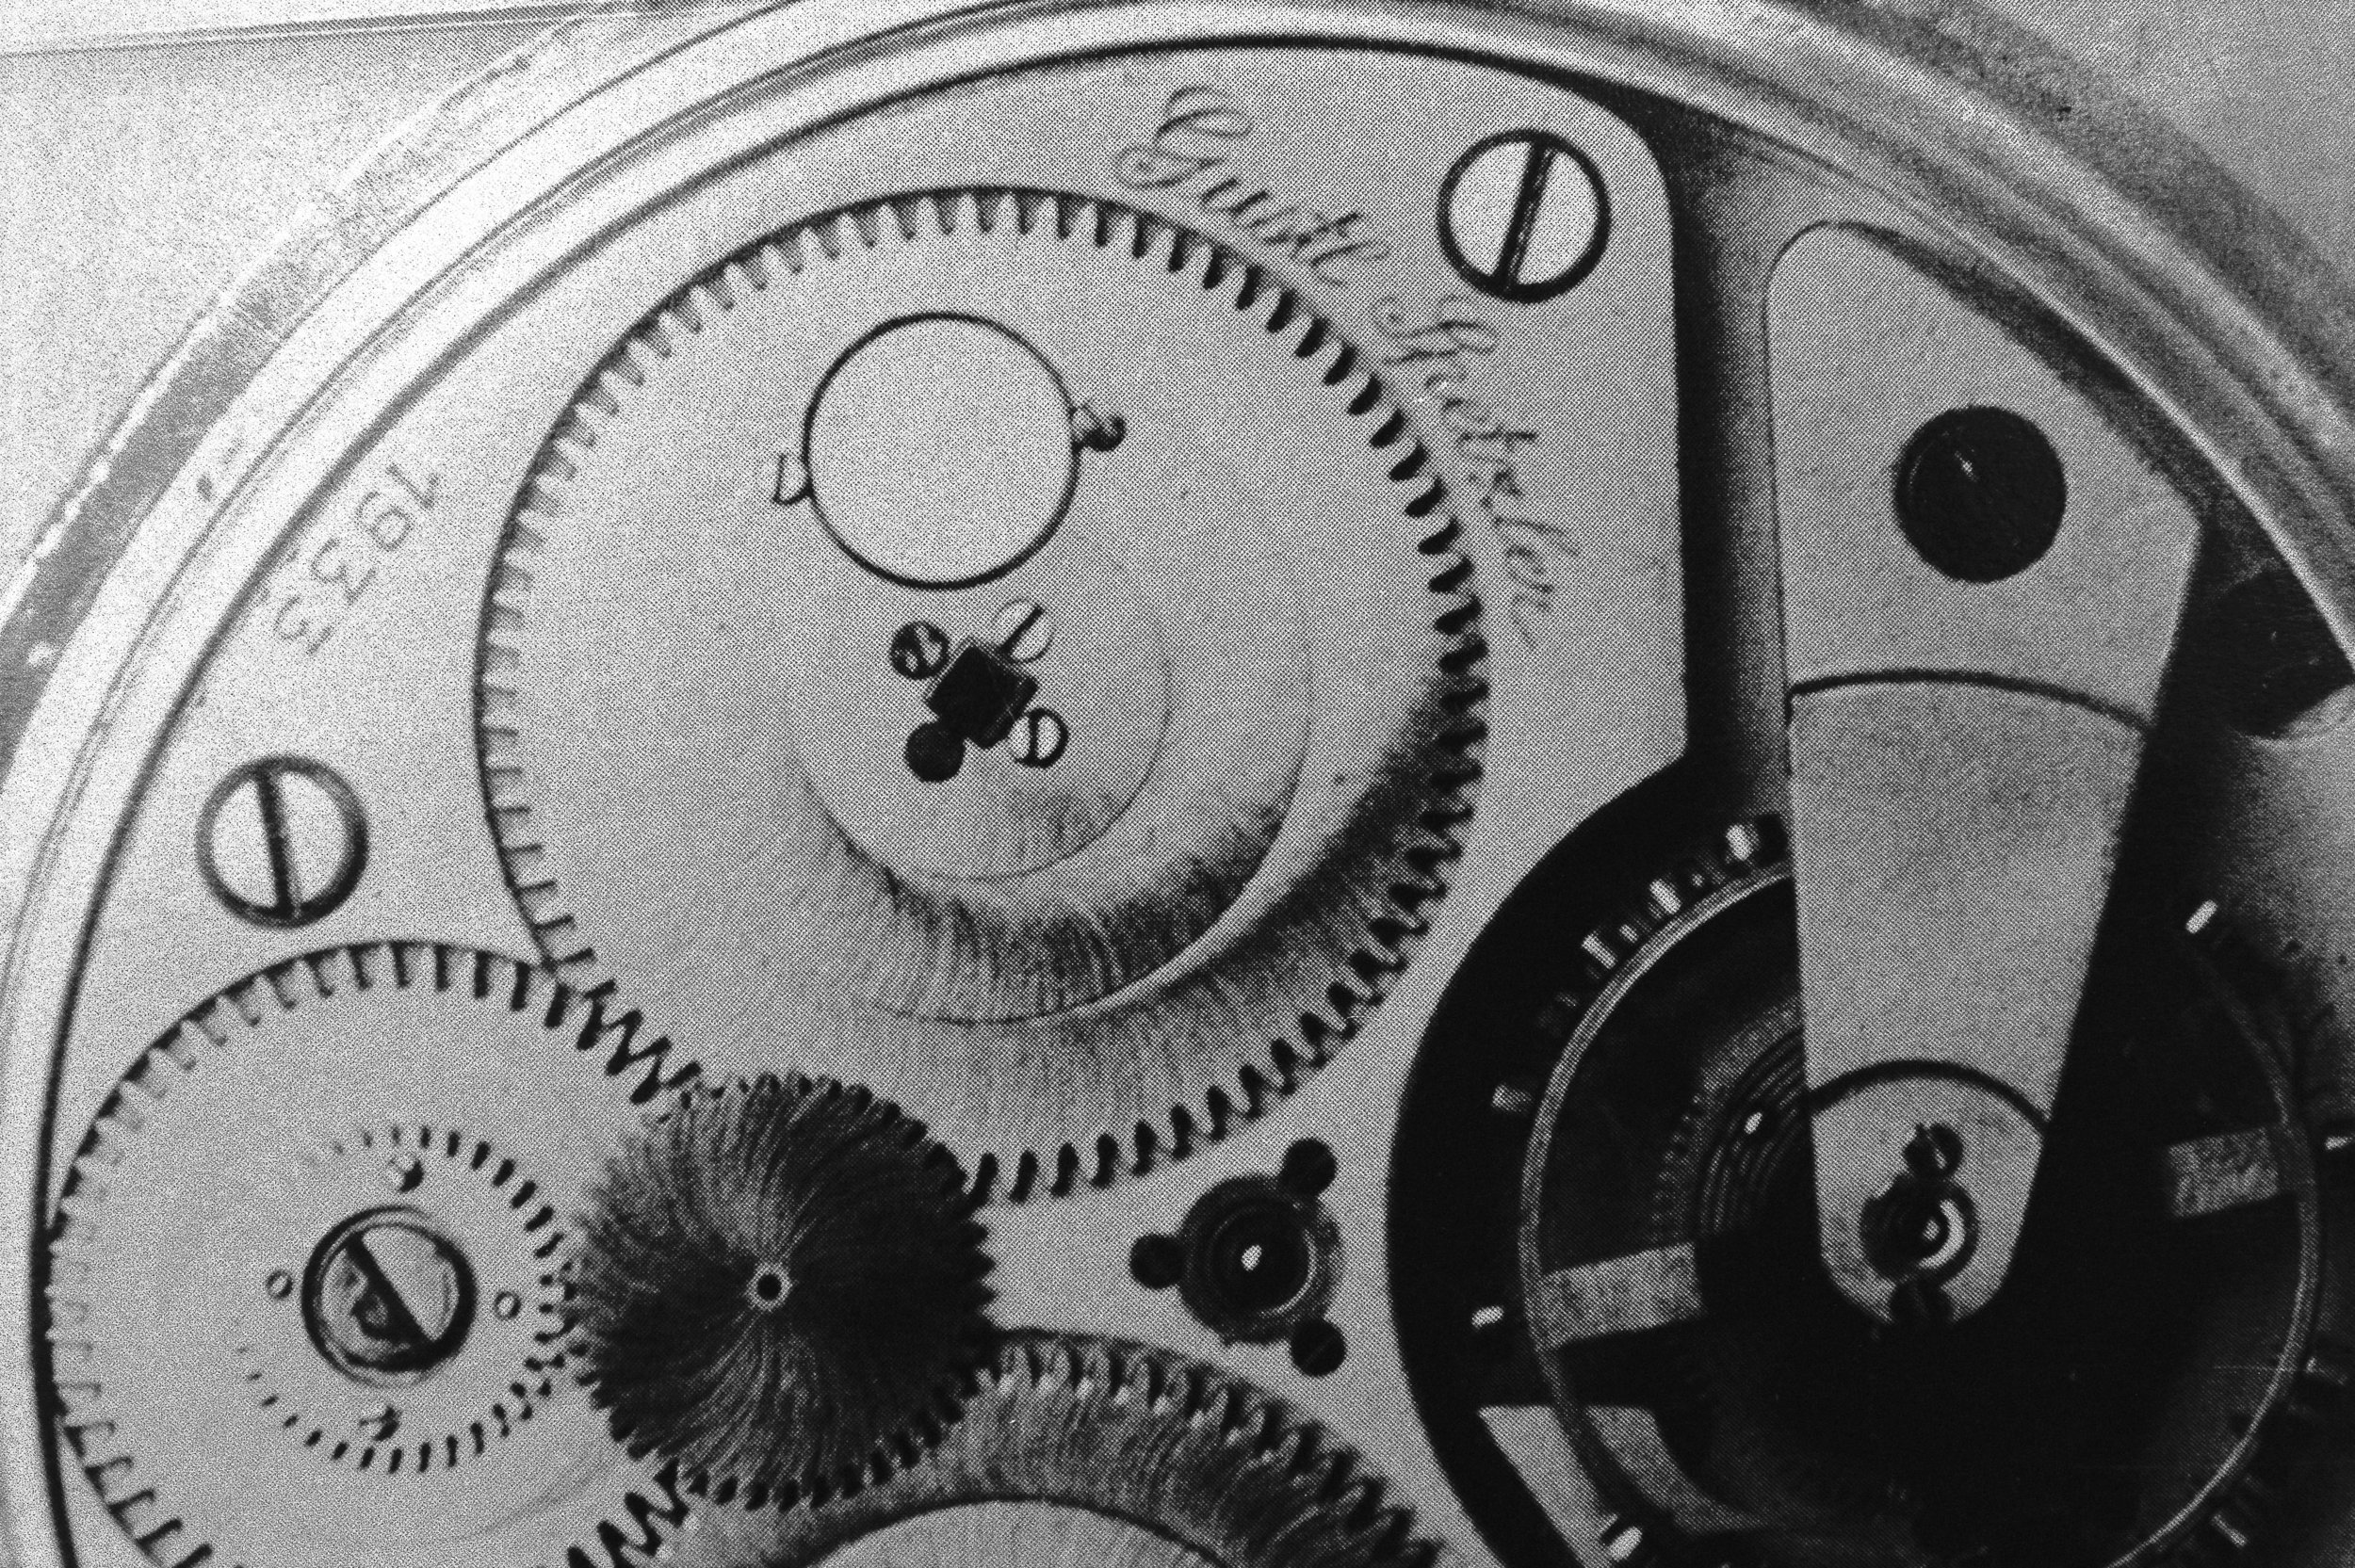  August Spetzler, father of Robert was a clock maker in Würzburg in Germany. His second cousin was suspected of having made the time-bomb clock used in assassination attempt on Hitler during the Second World War. August was the father of the Quartz w